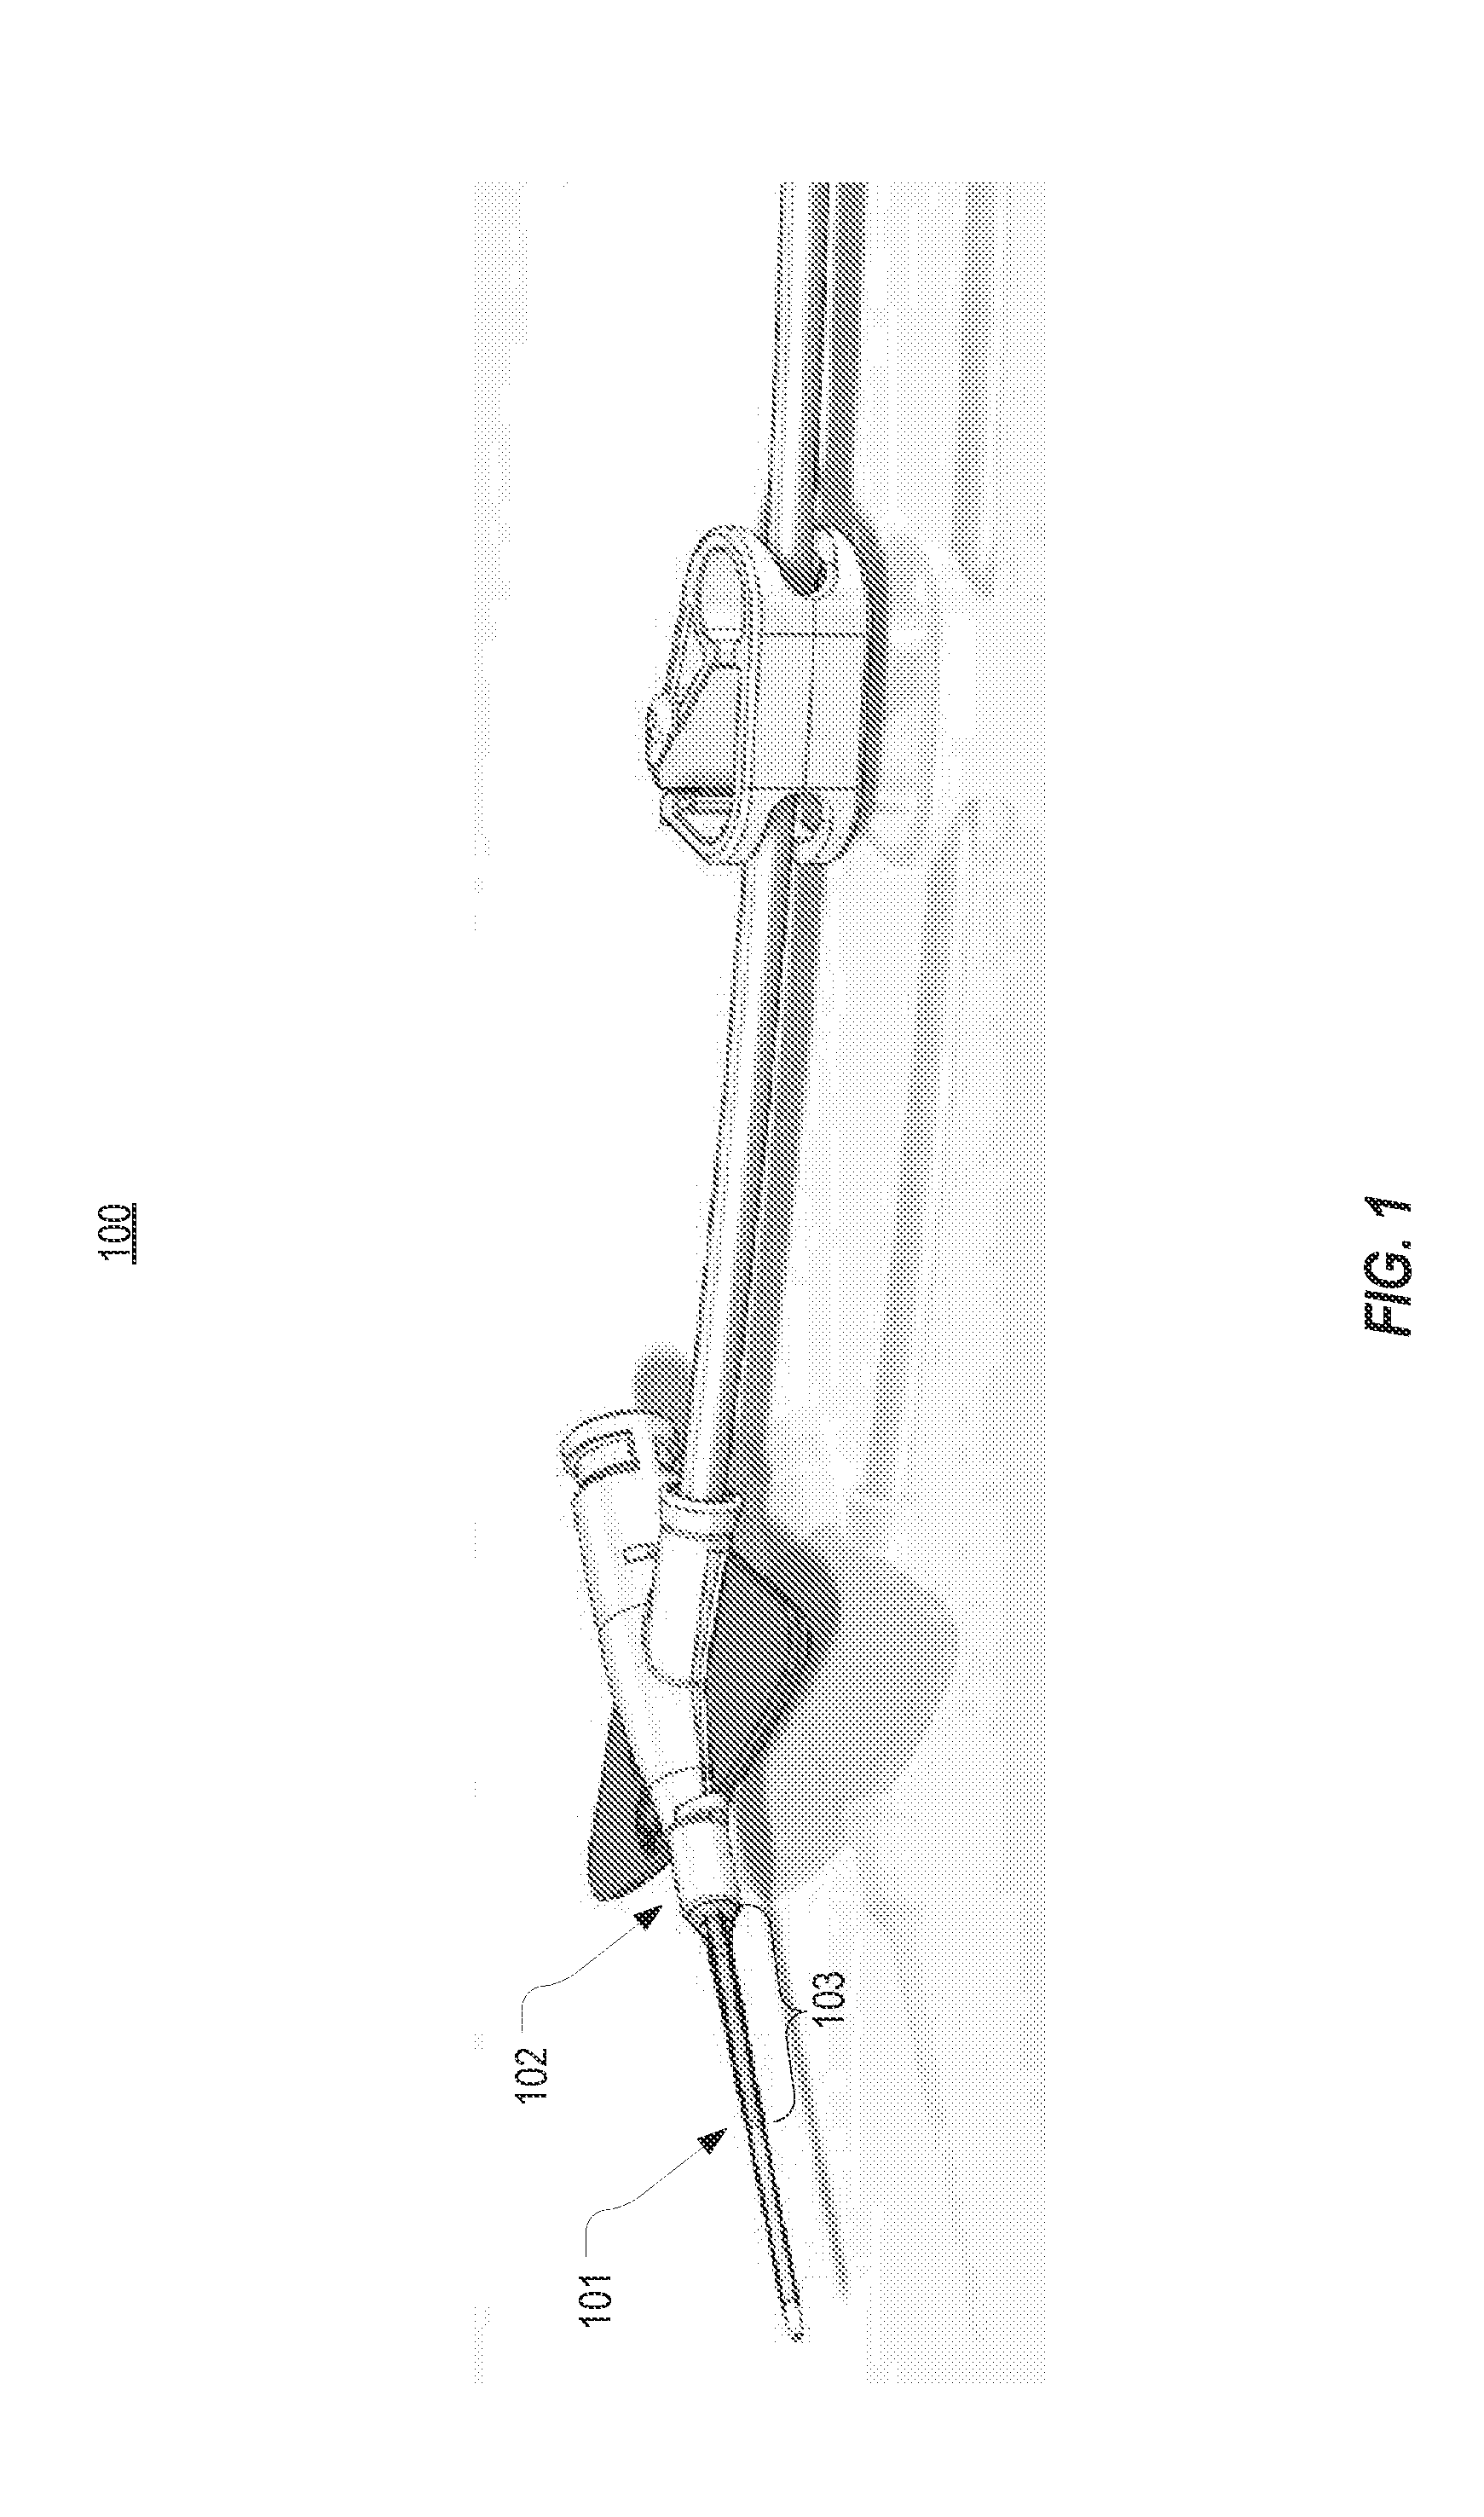 Antimicrobial coating forming kink resistant feature on a vascular access device